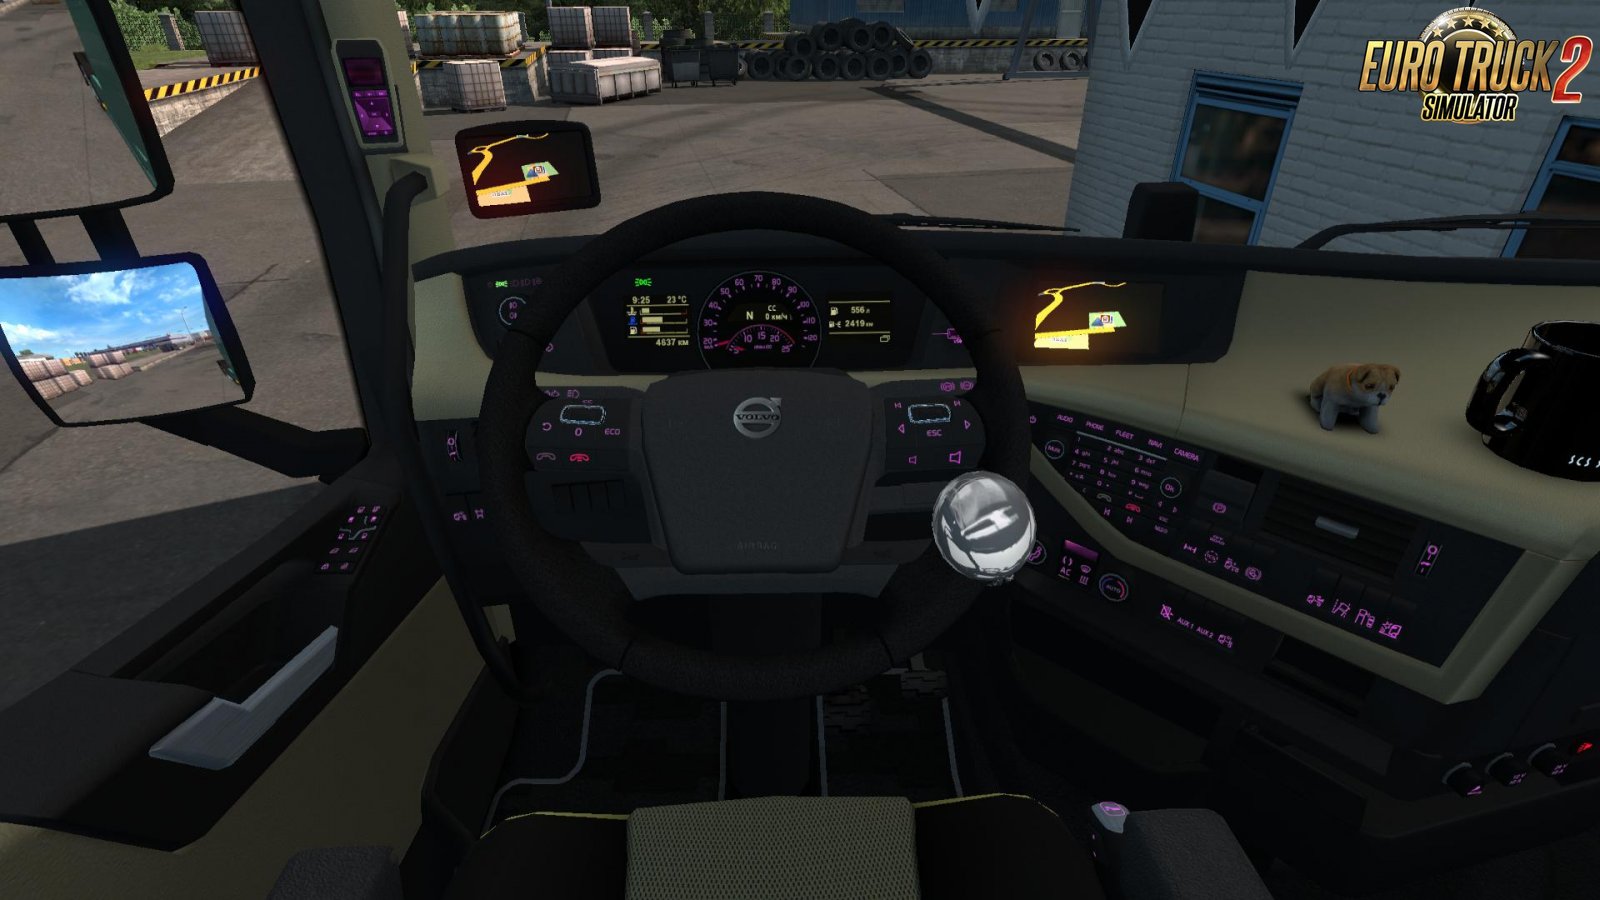 Dashboard lights for Volvo FH 2012 [1.34.x]